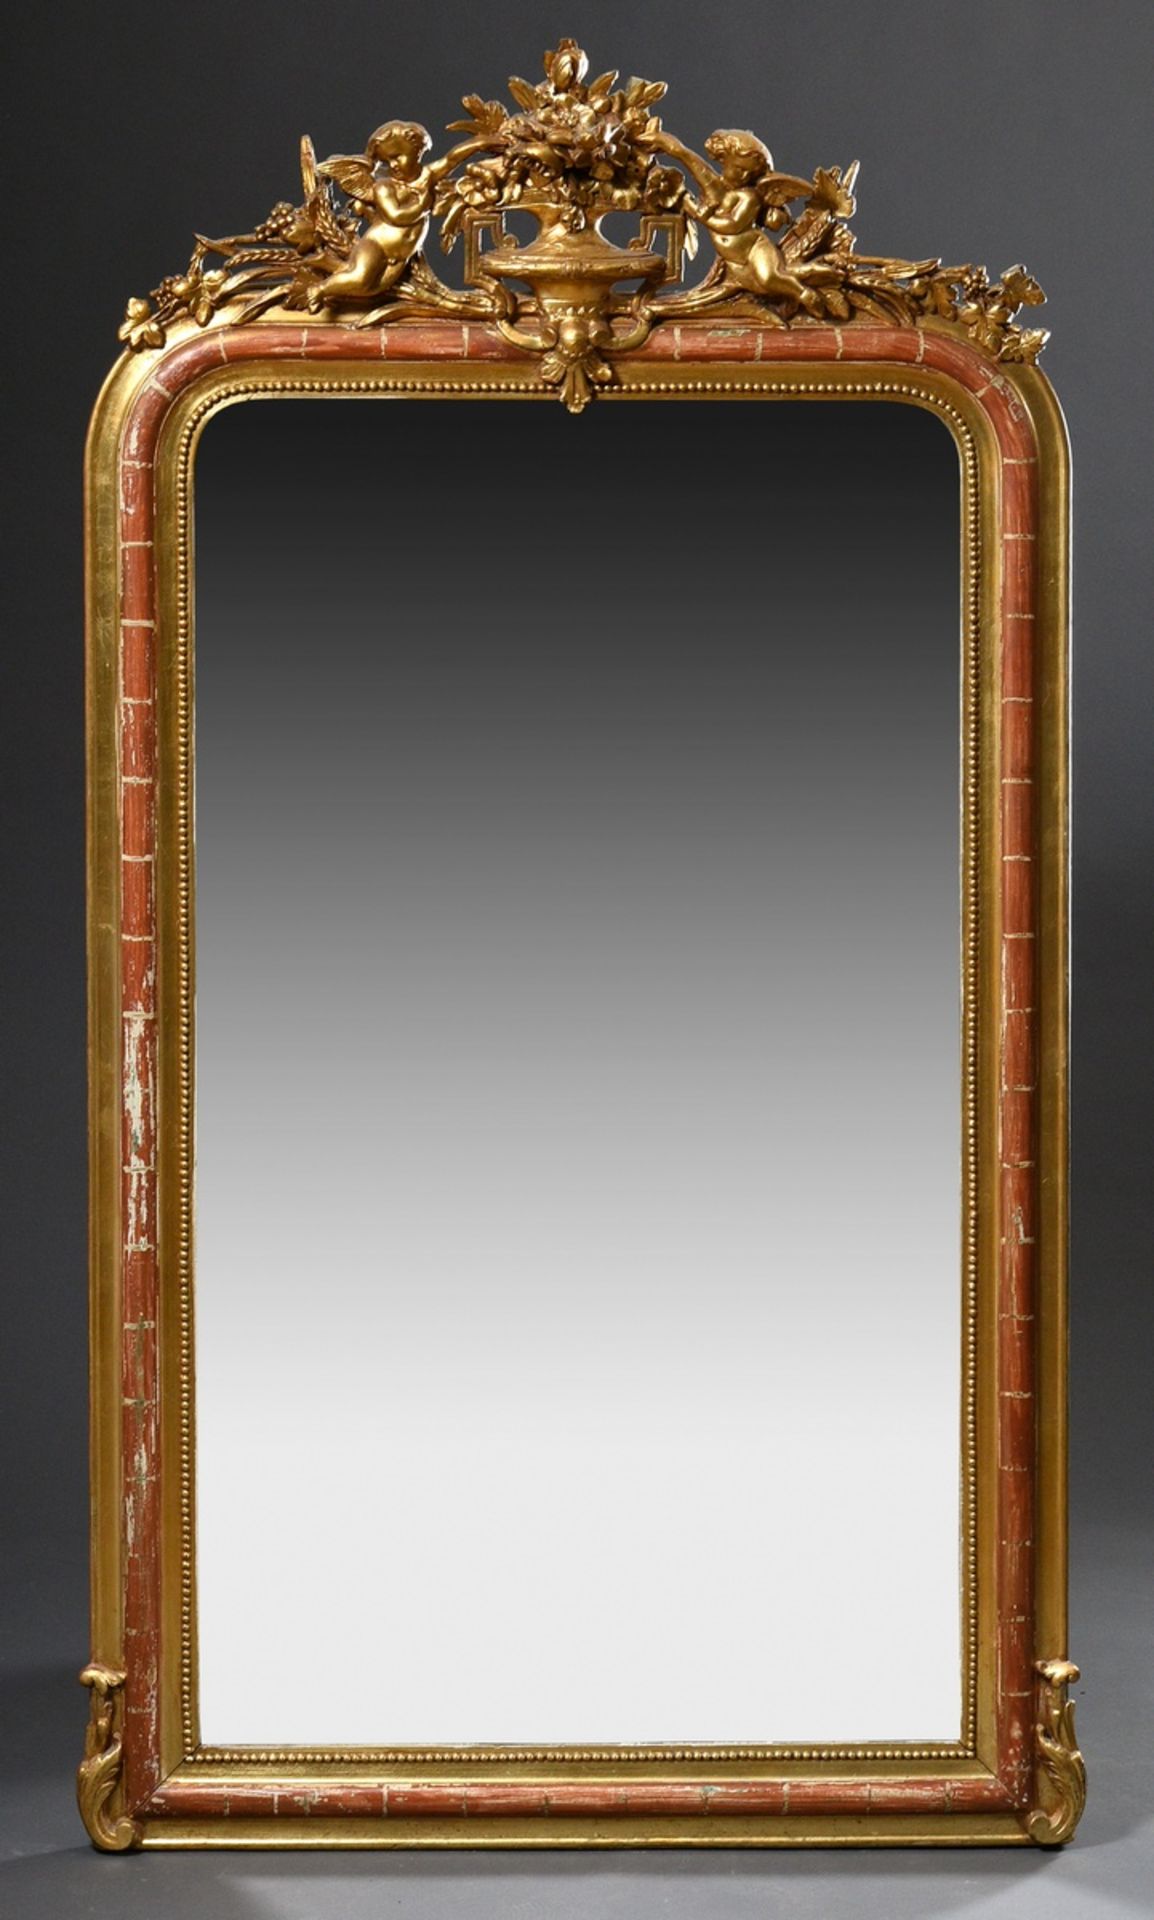 French fireplace mirror with figural decoration "Putti with vase", stucco gilded over bolus ground,